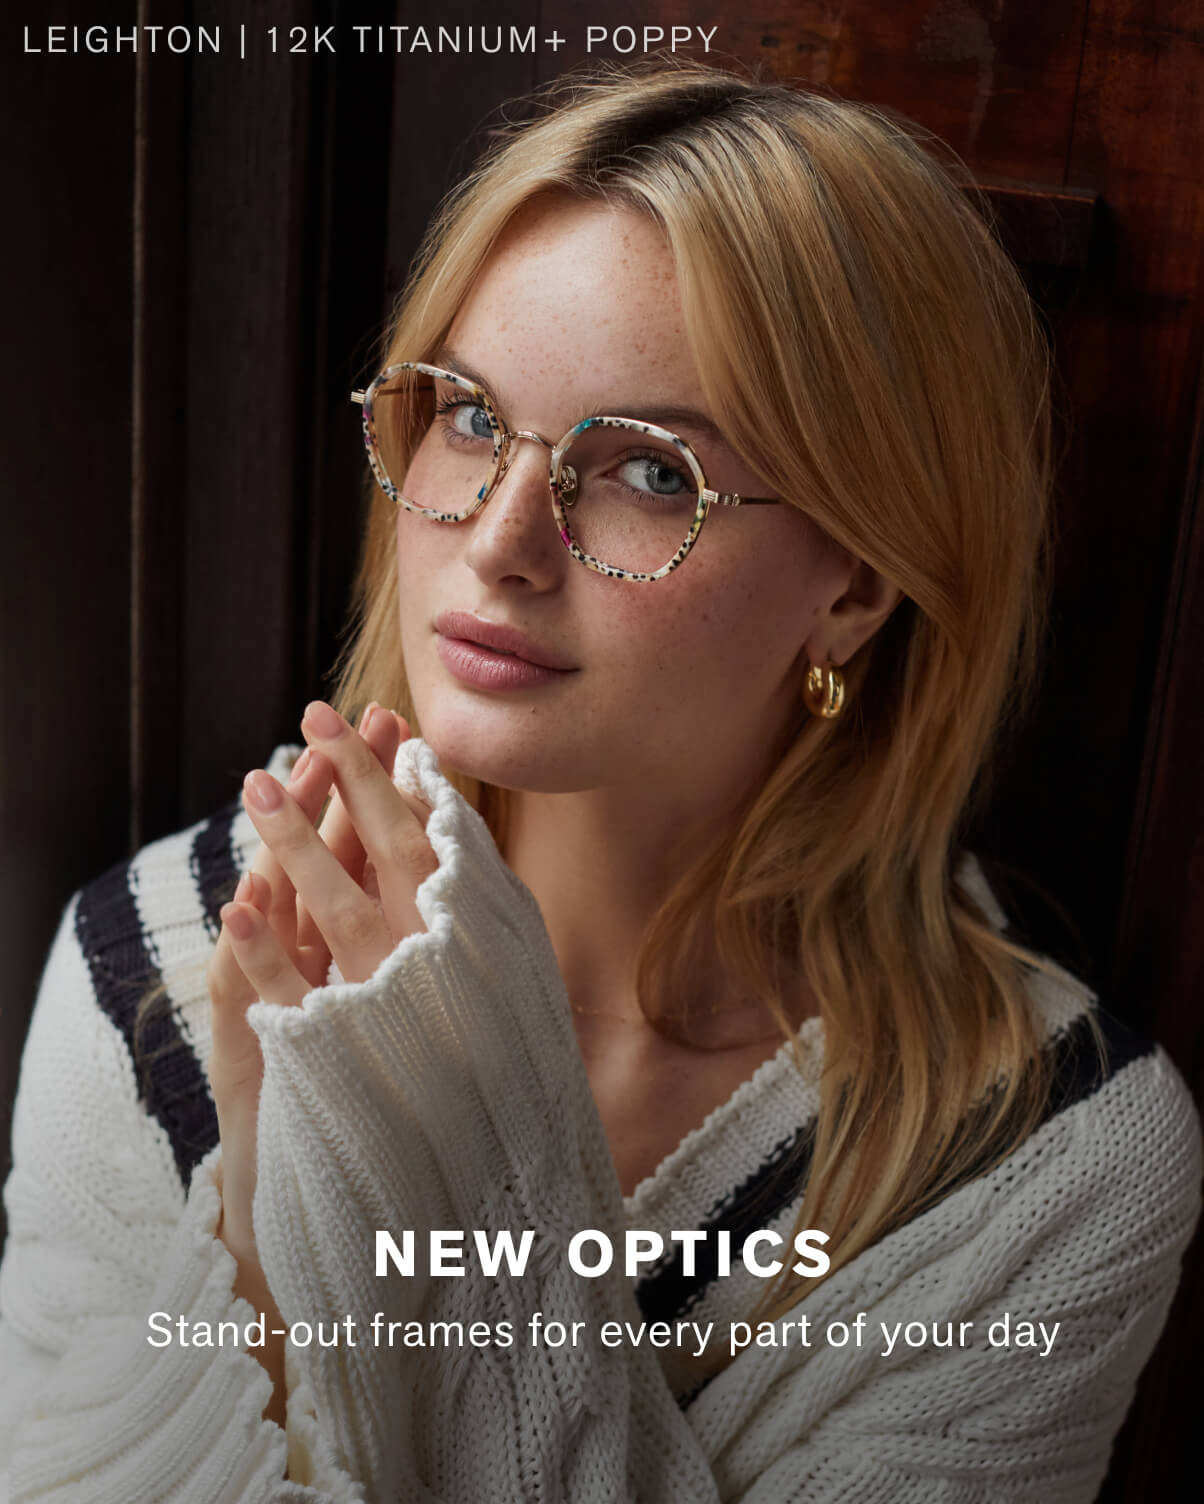 New Optics Stand-out frames for every part of your day